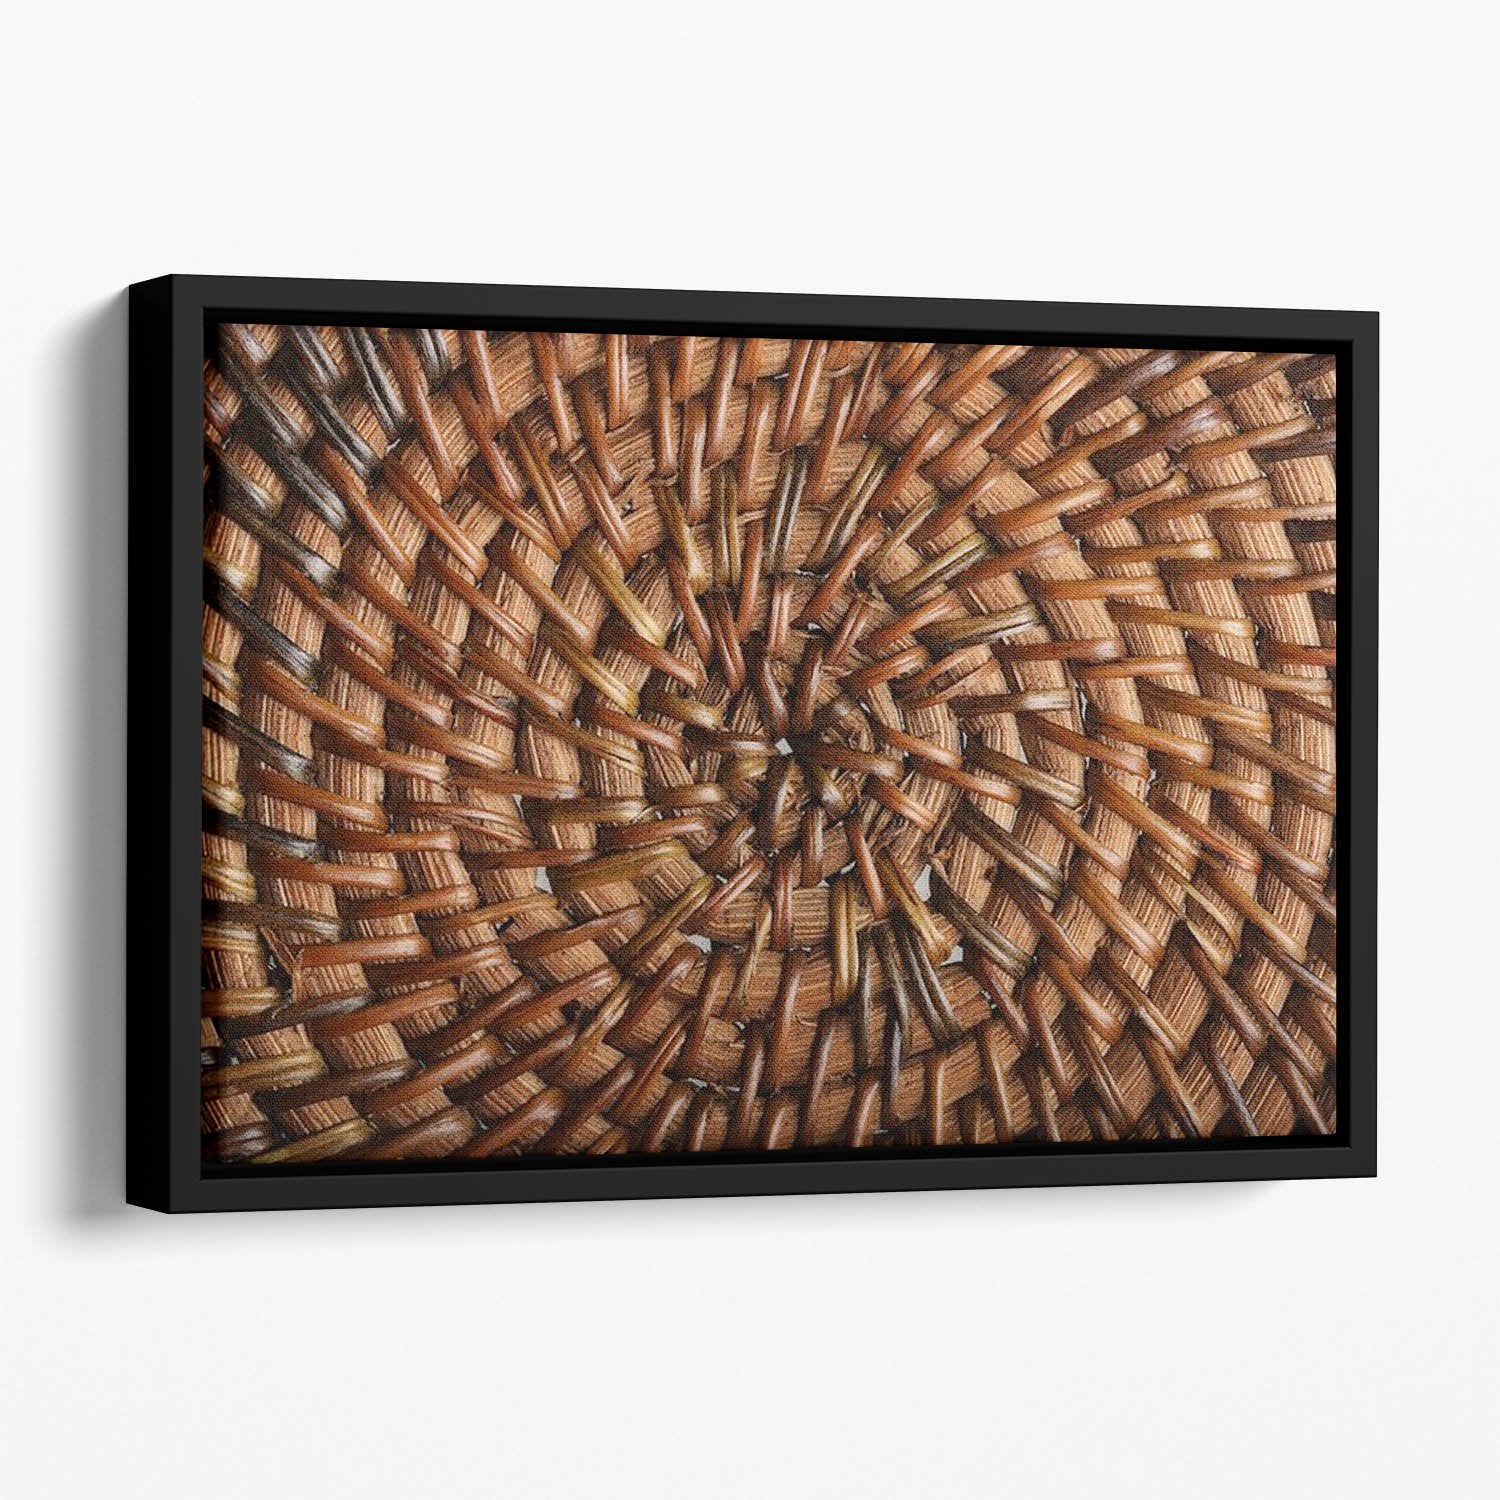 Woven wooden texture Floating Framed Canvas